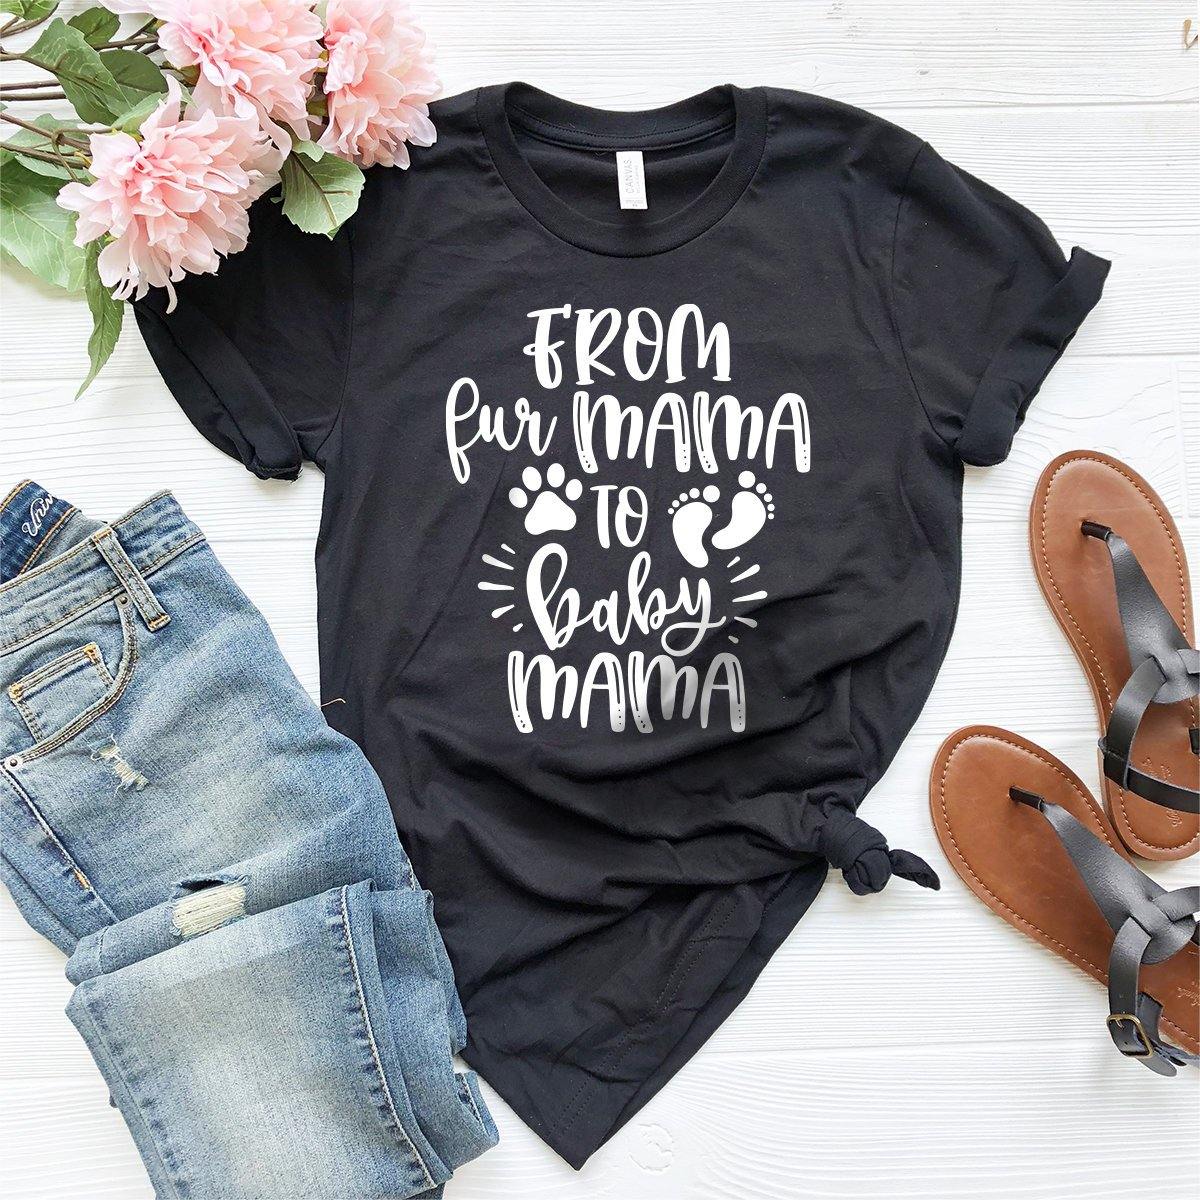 From Fur Mama To Baby Mama Shirt, Baby Announcement Shirt, New Mom Gift, Fur Mom And Baby Mom Shirt, New Mama Gift, Pregnancy T-Shirt - Fastdeliverytees.com